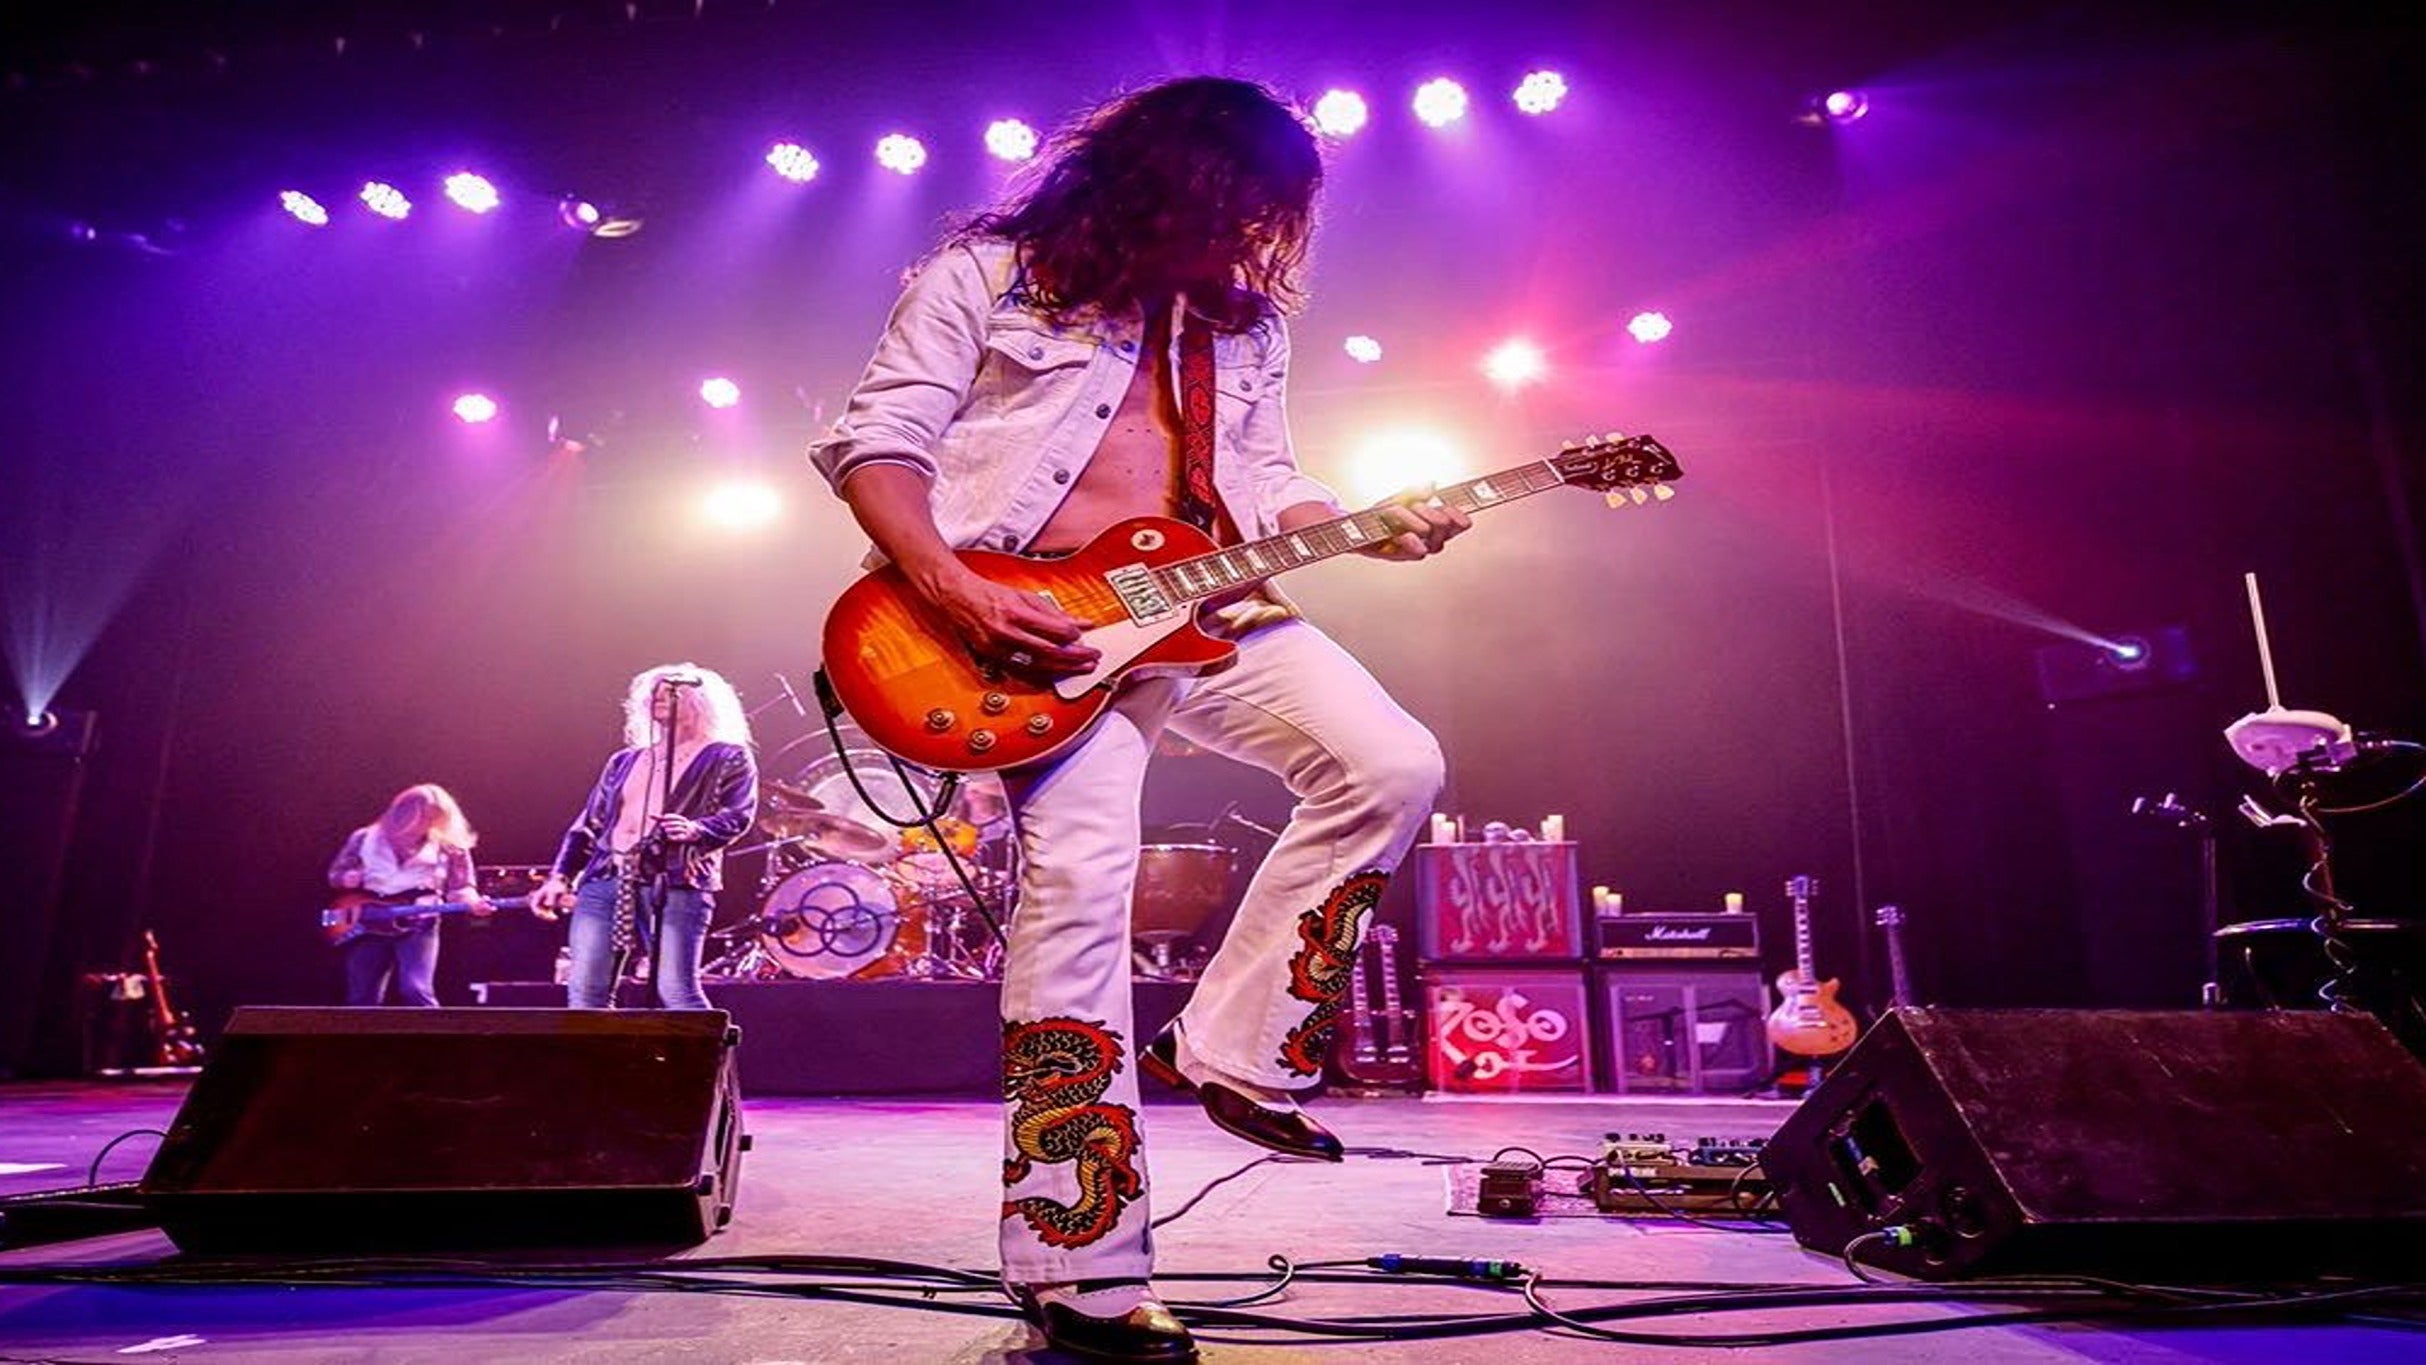 presale c0de for Zoso - A Tribute to Led Zeppelin tickets in Chattanooga - TN (The Walker Theatre)